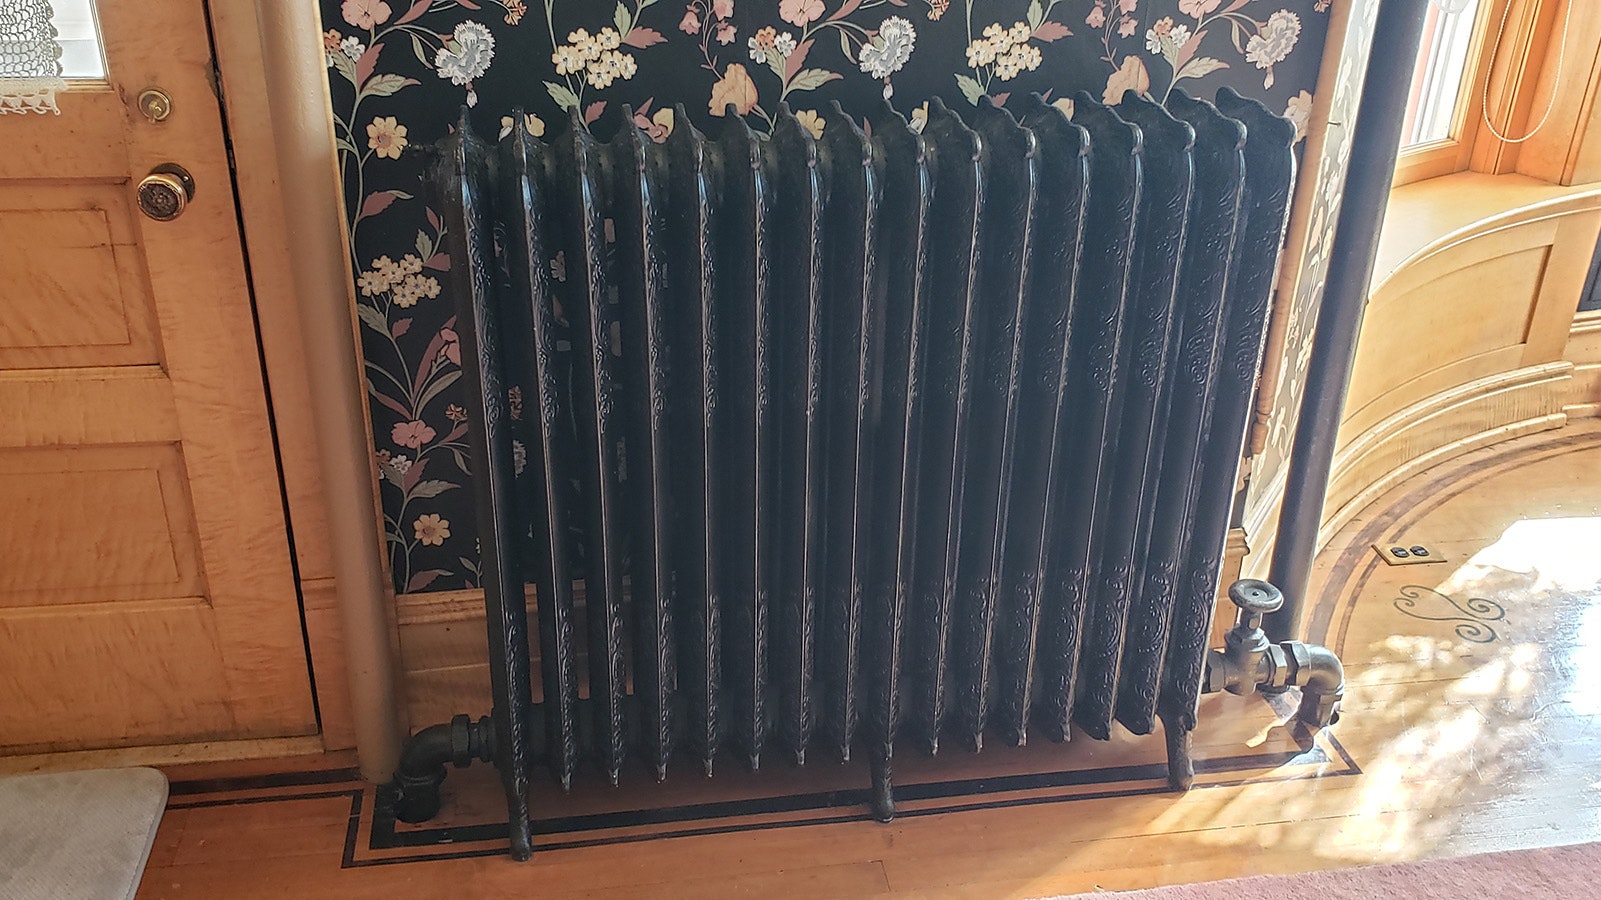 The Ferris Mansion is heated with a series of radiators that are still in good working order.